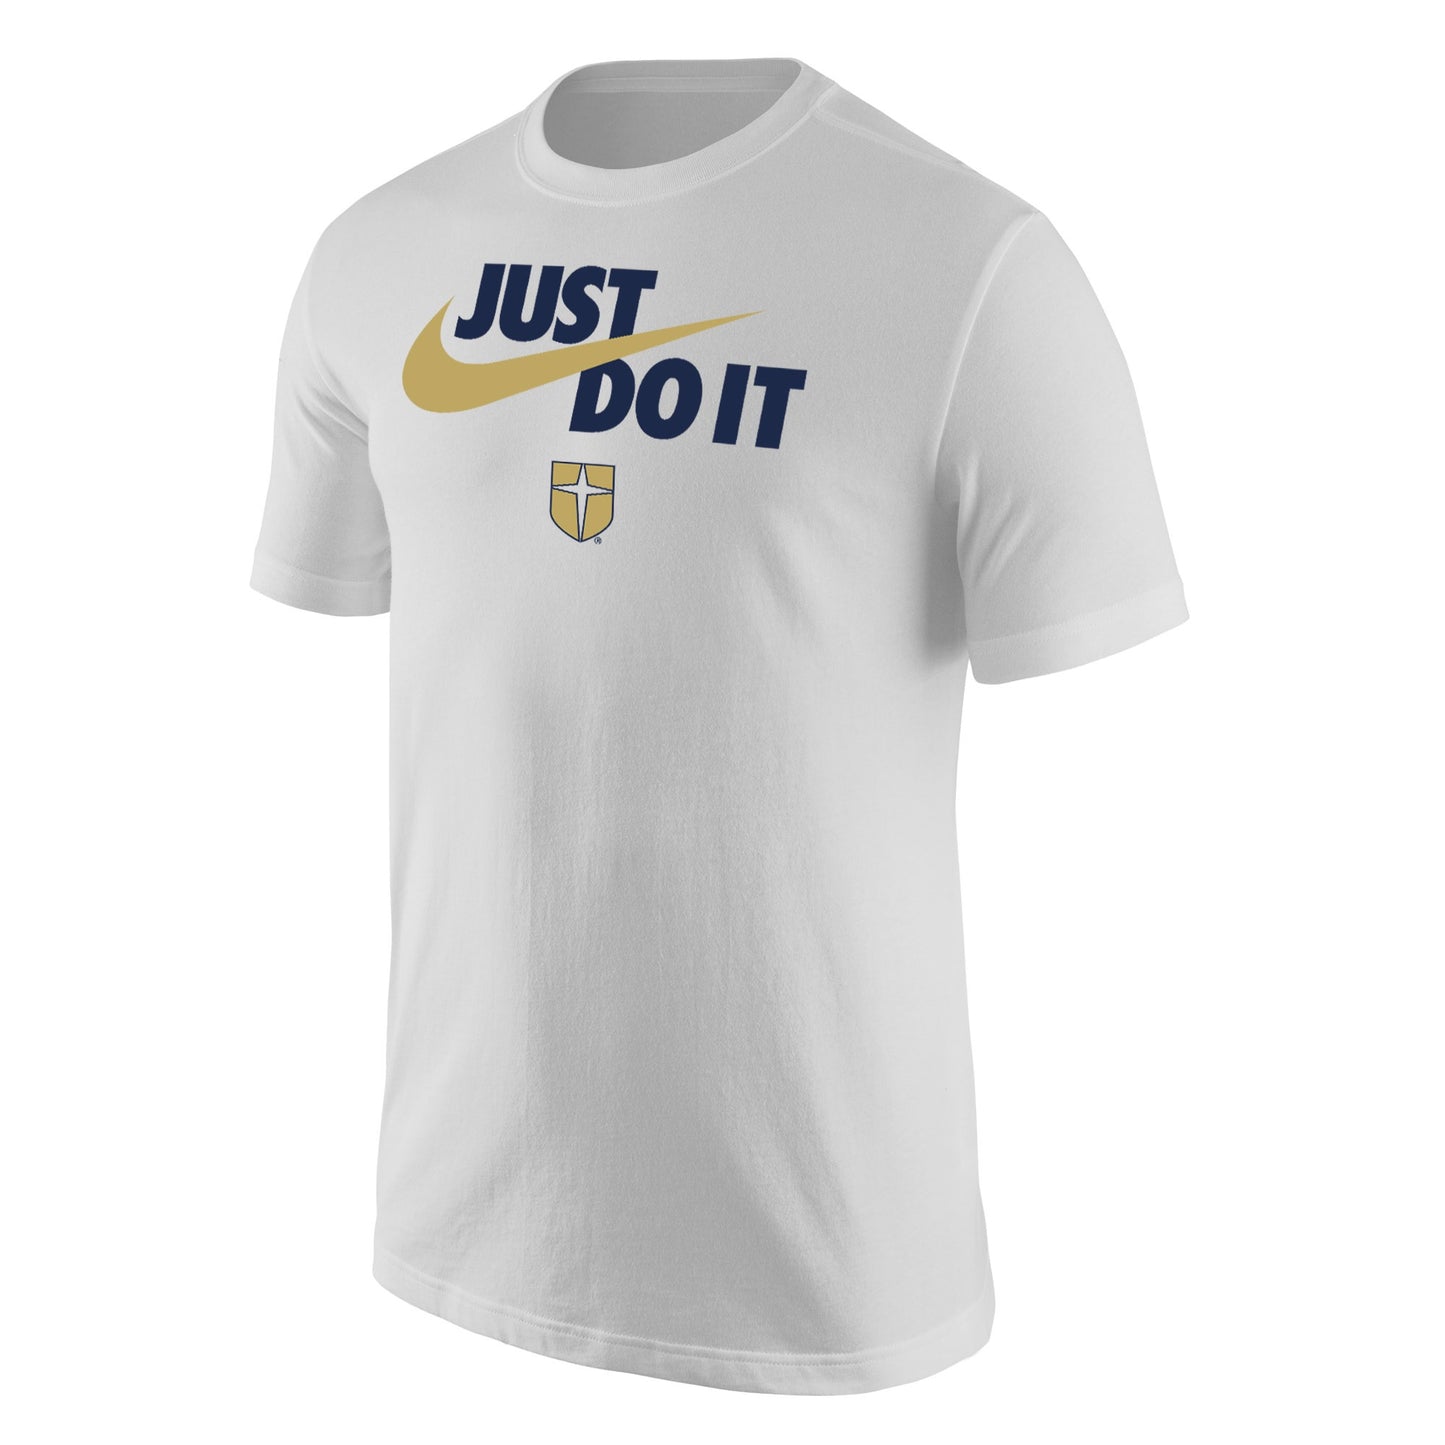 Nike Core "Just Do It" Cotton Tee